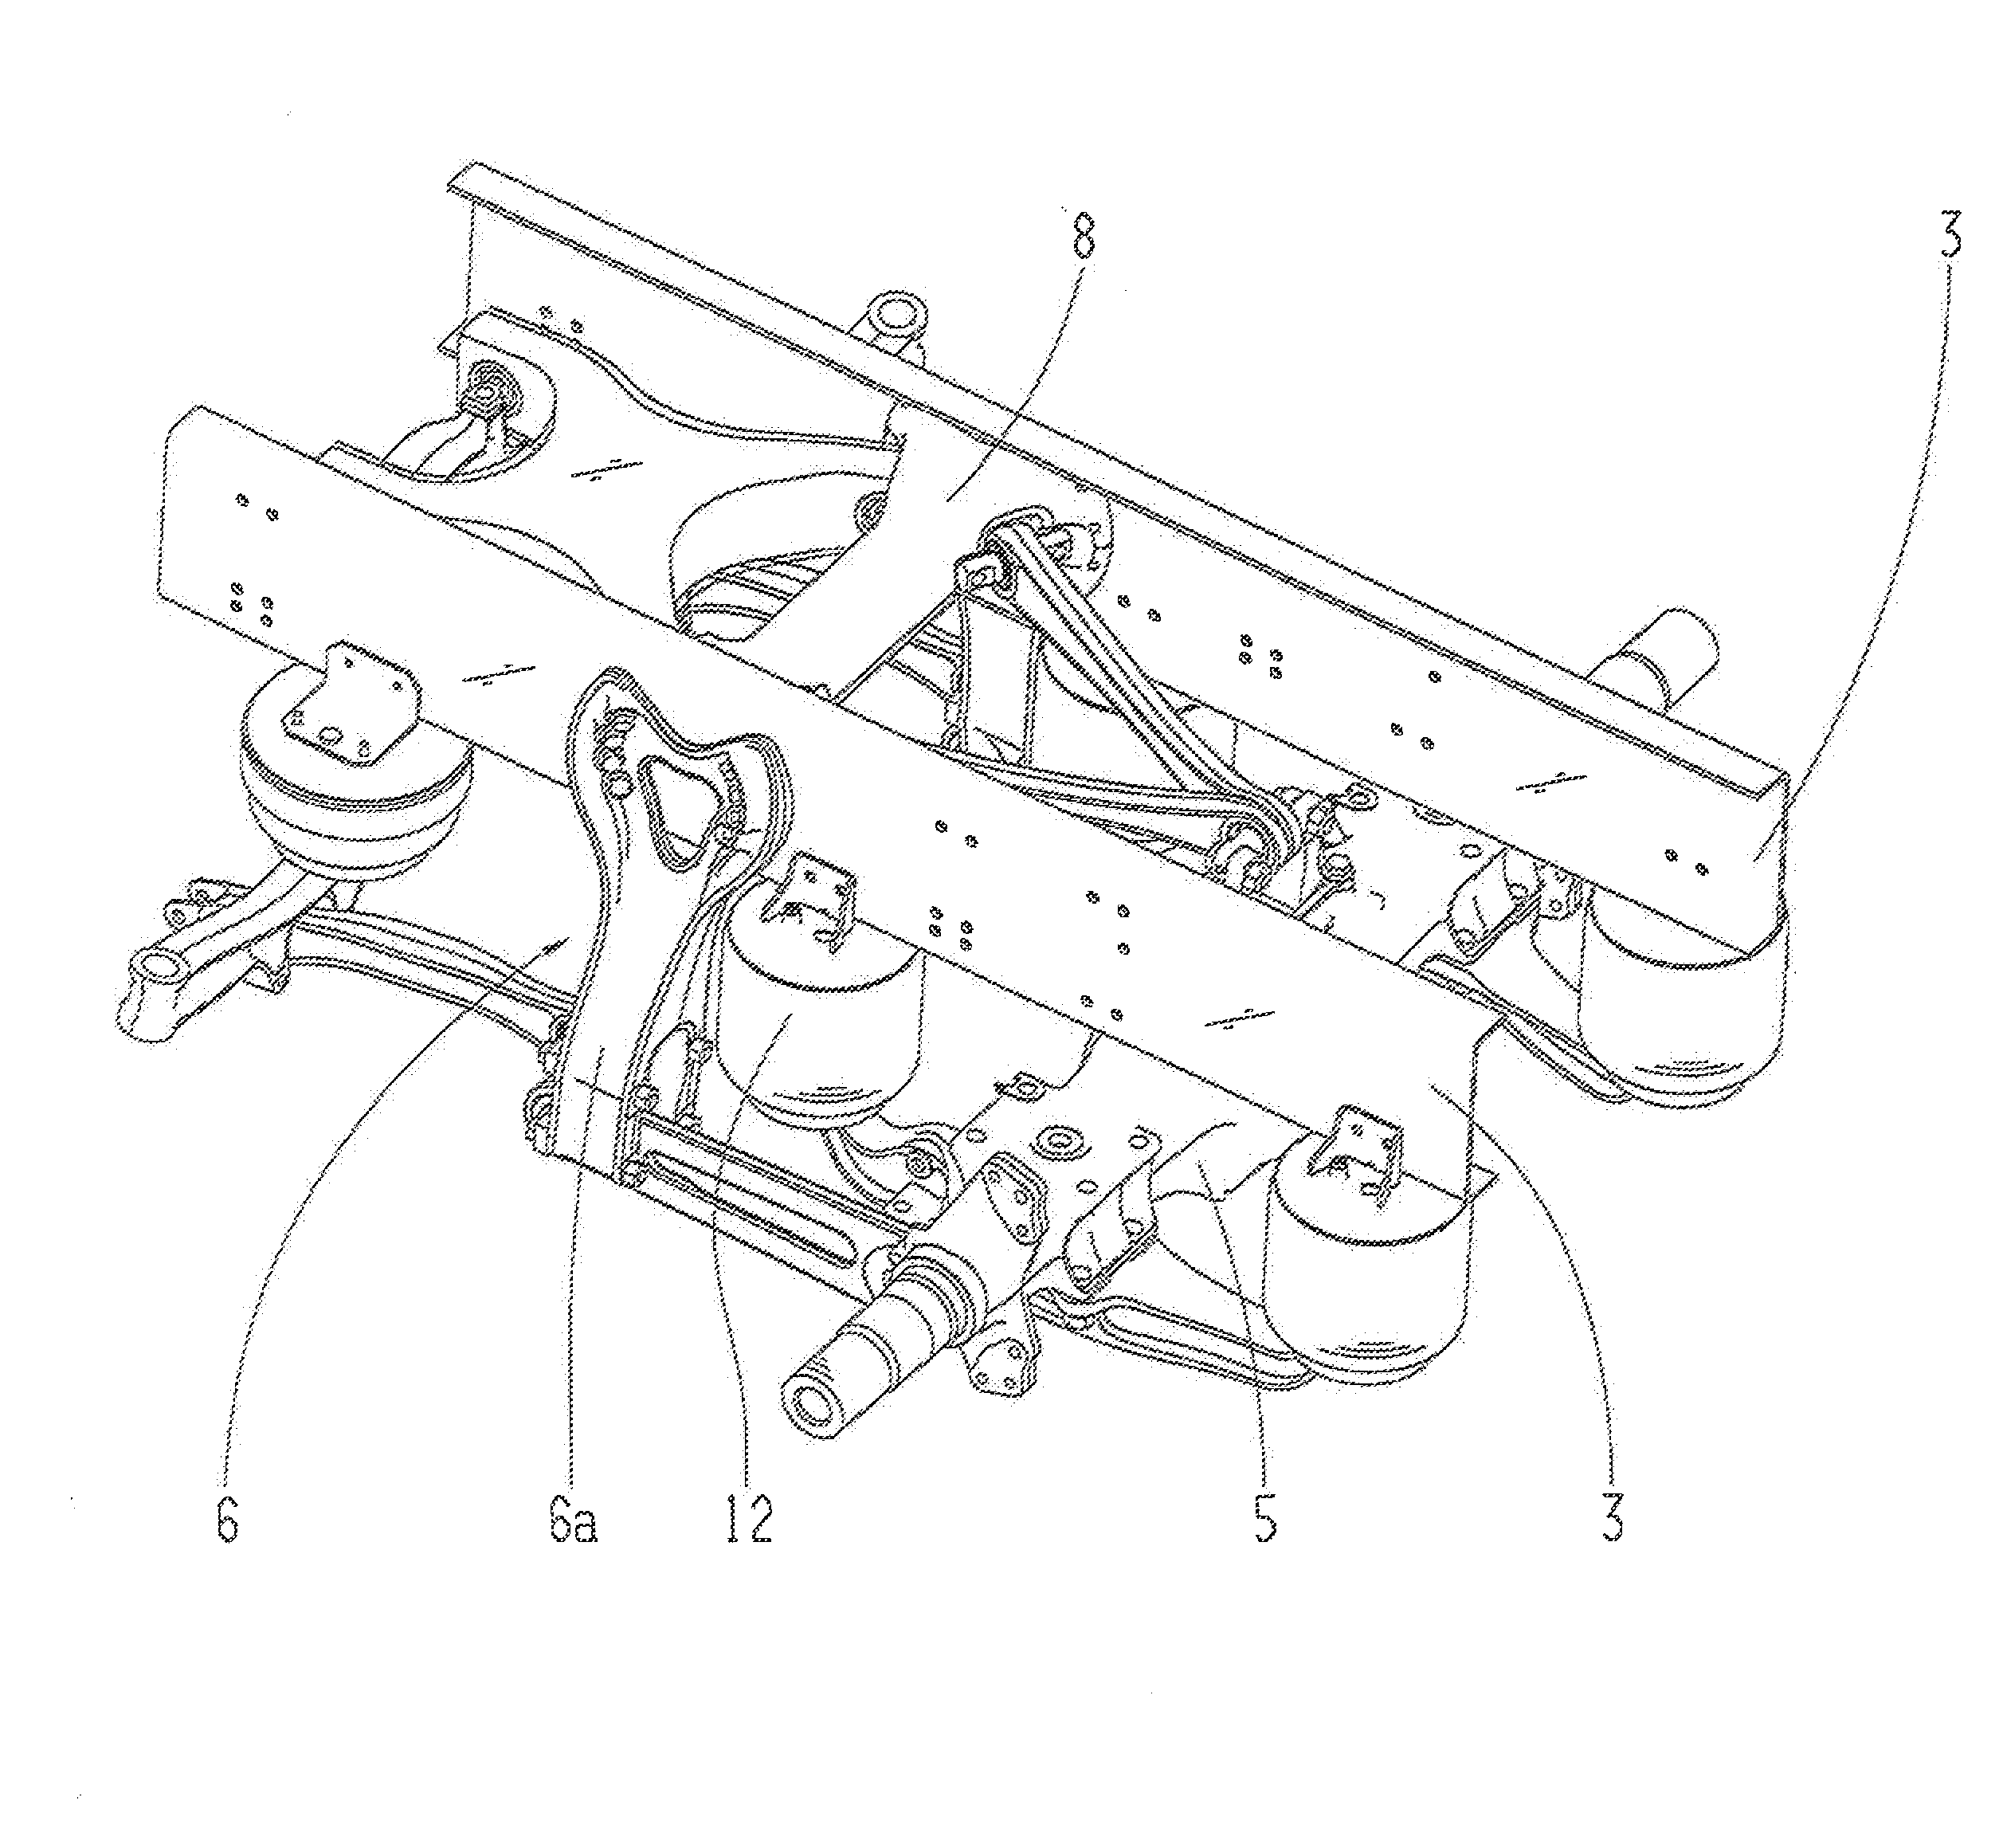 Motor vehicle with a vehicle frame